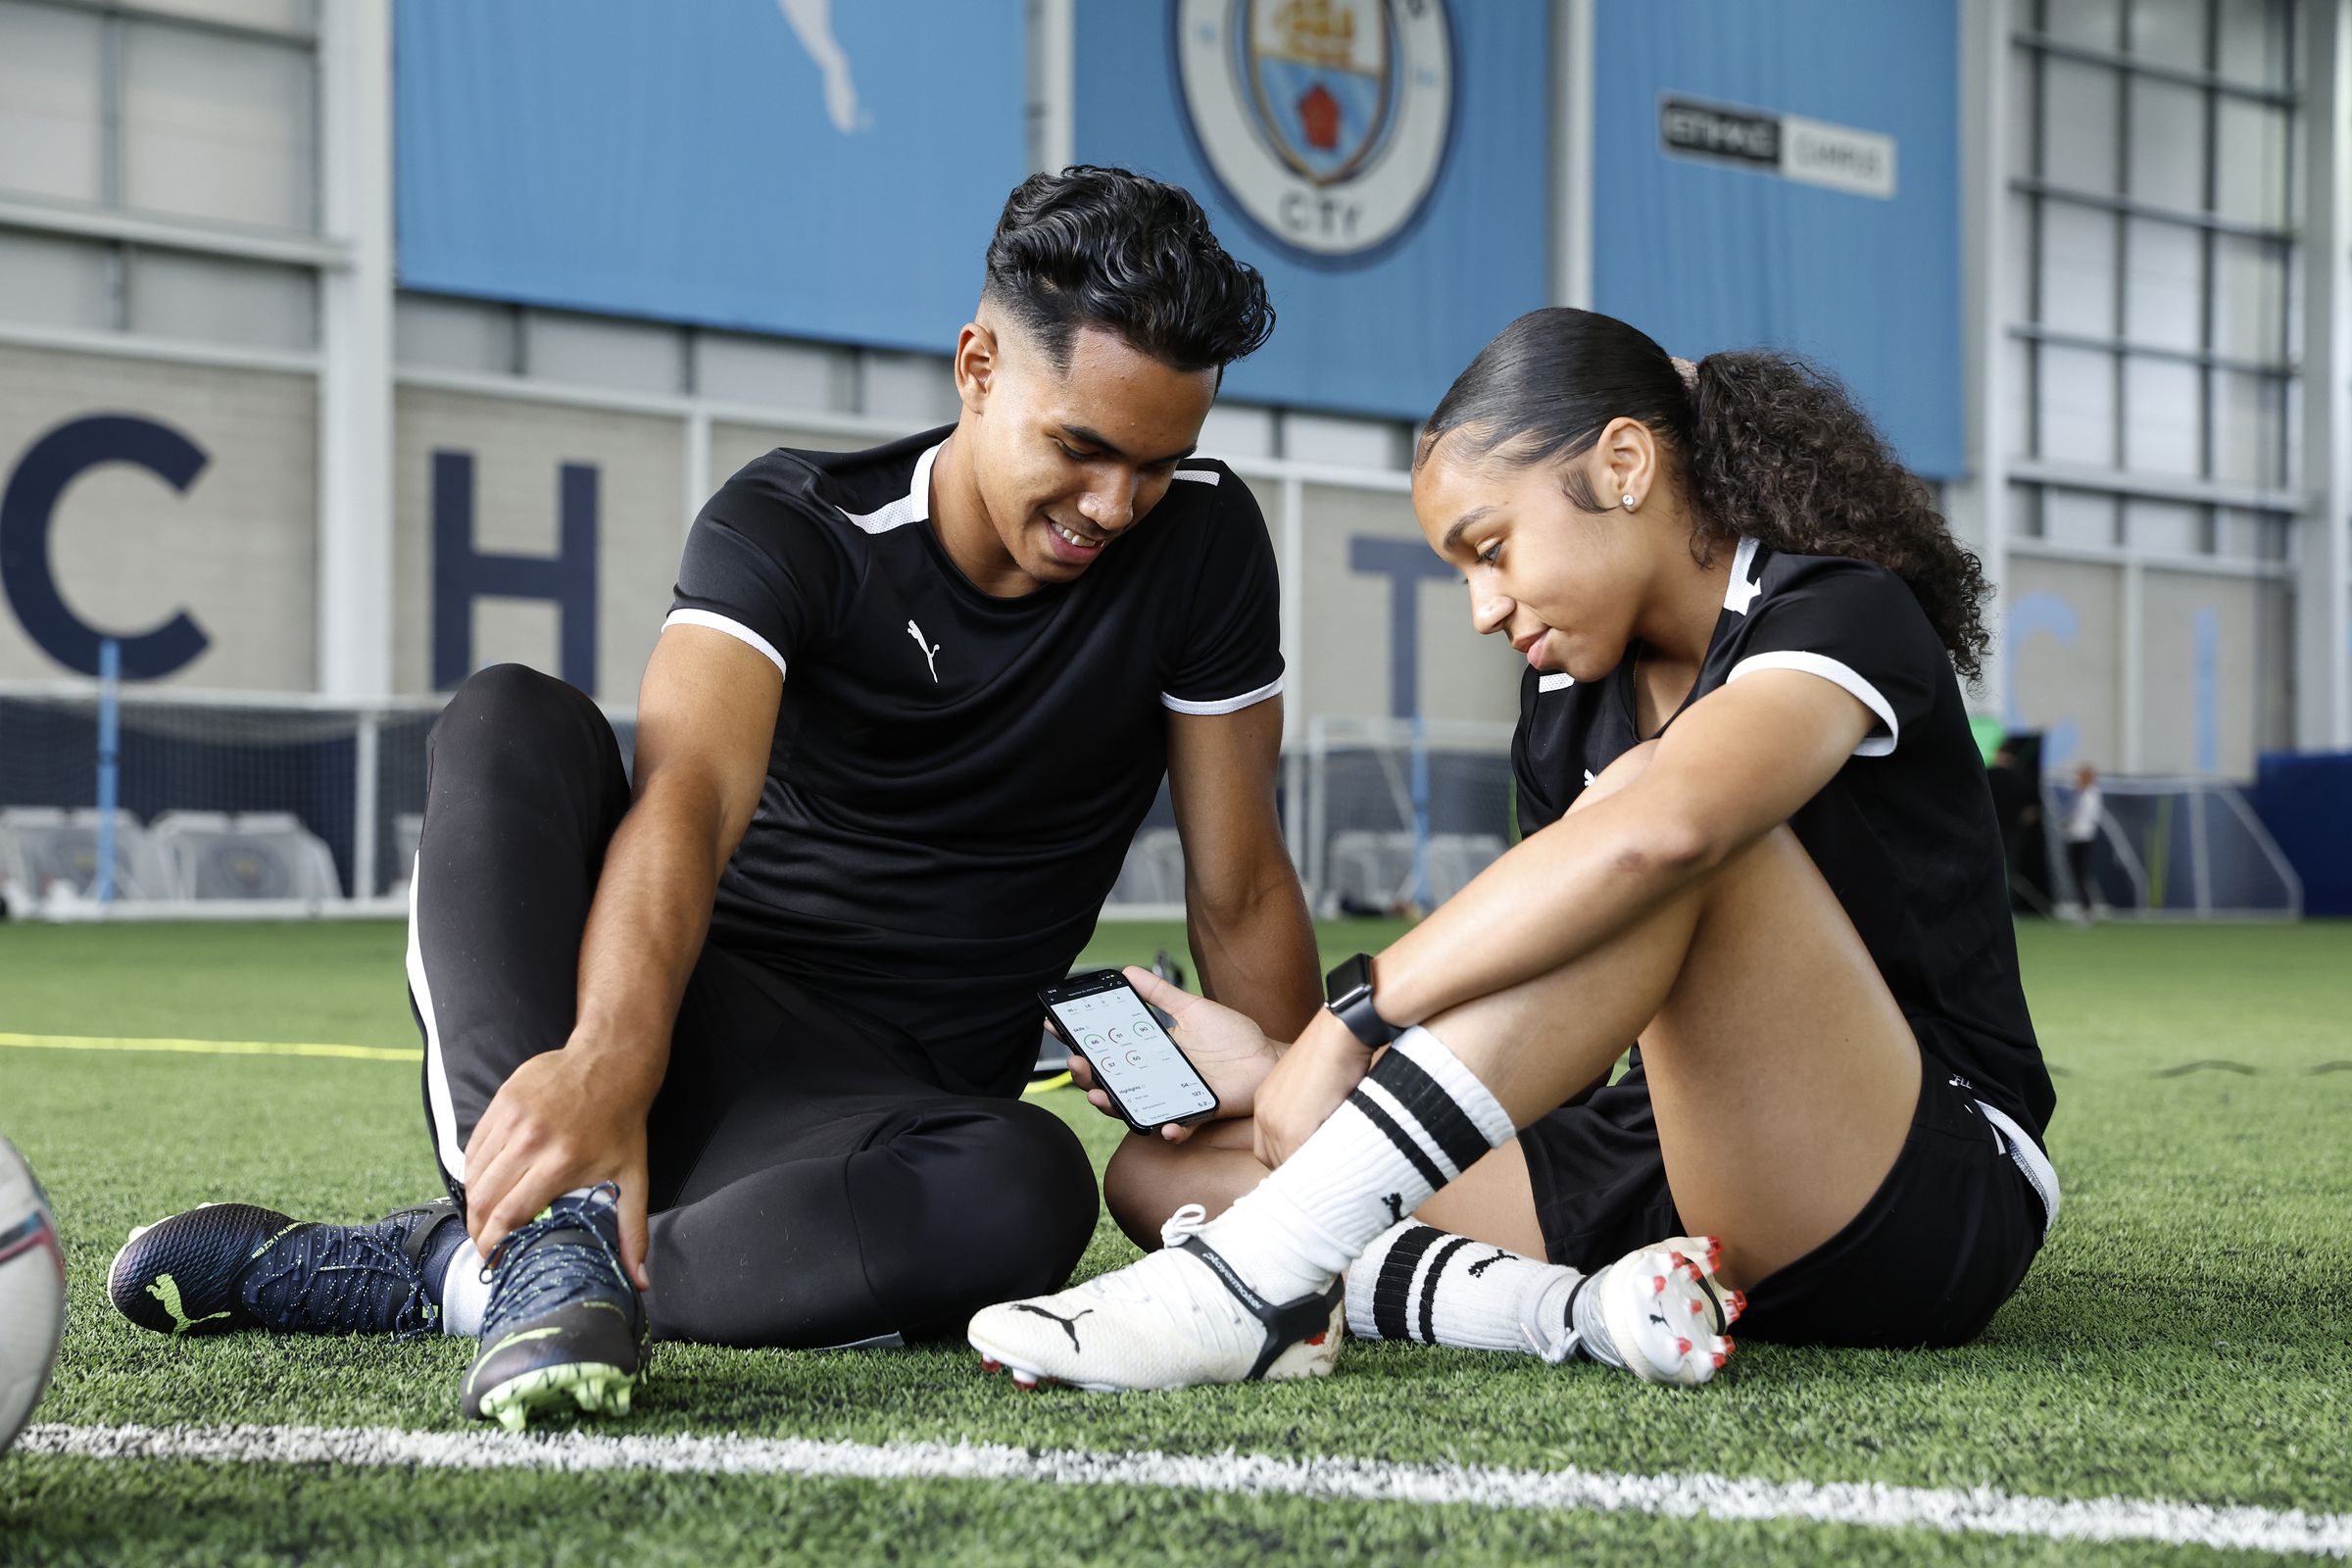 Two players looking at their phone while wearing the Cityplay tracker on their shoes.